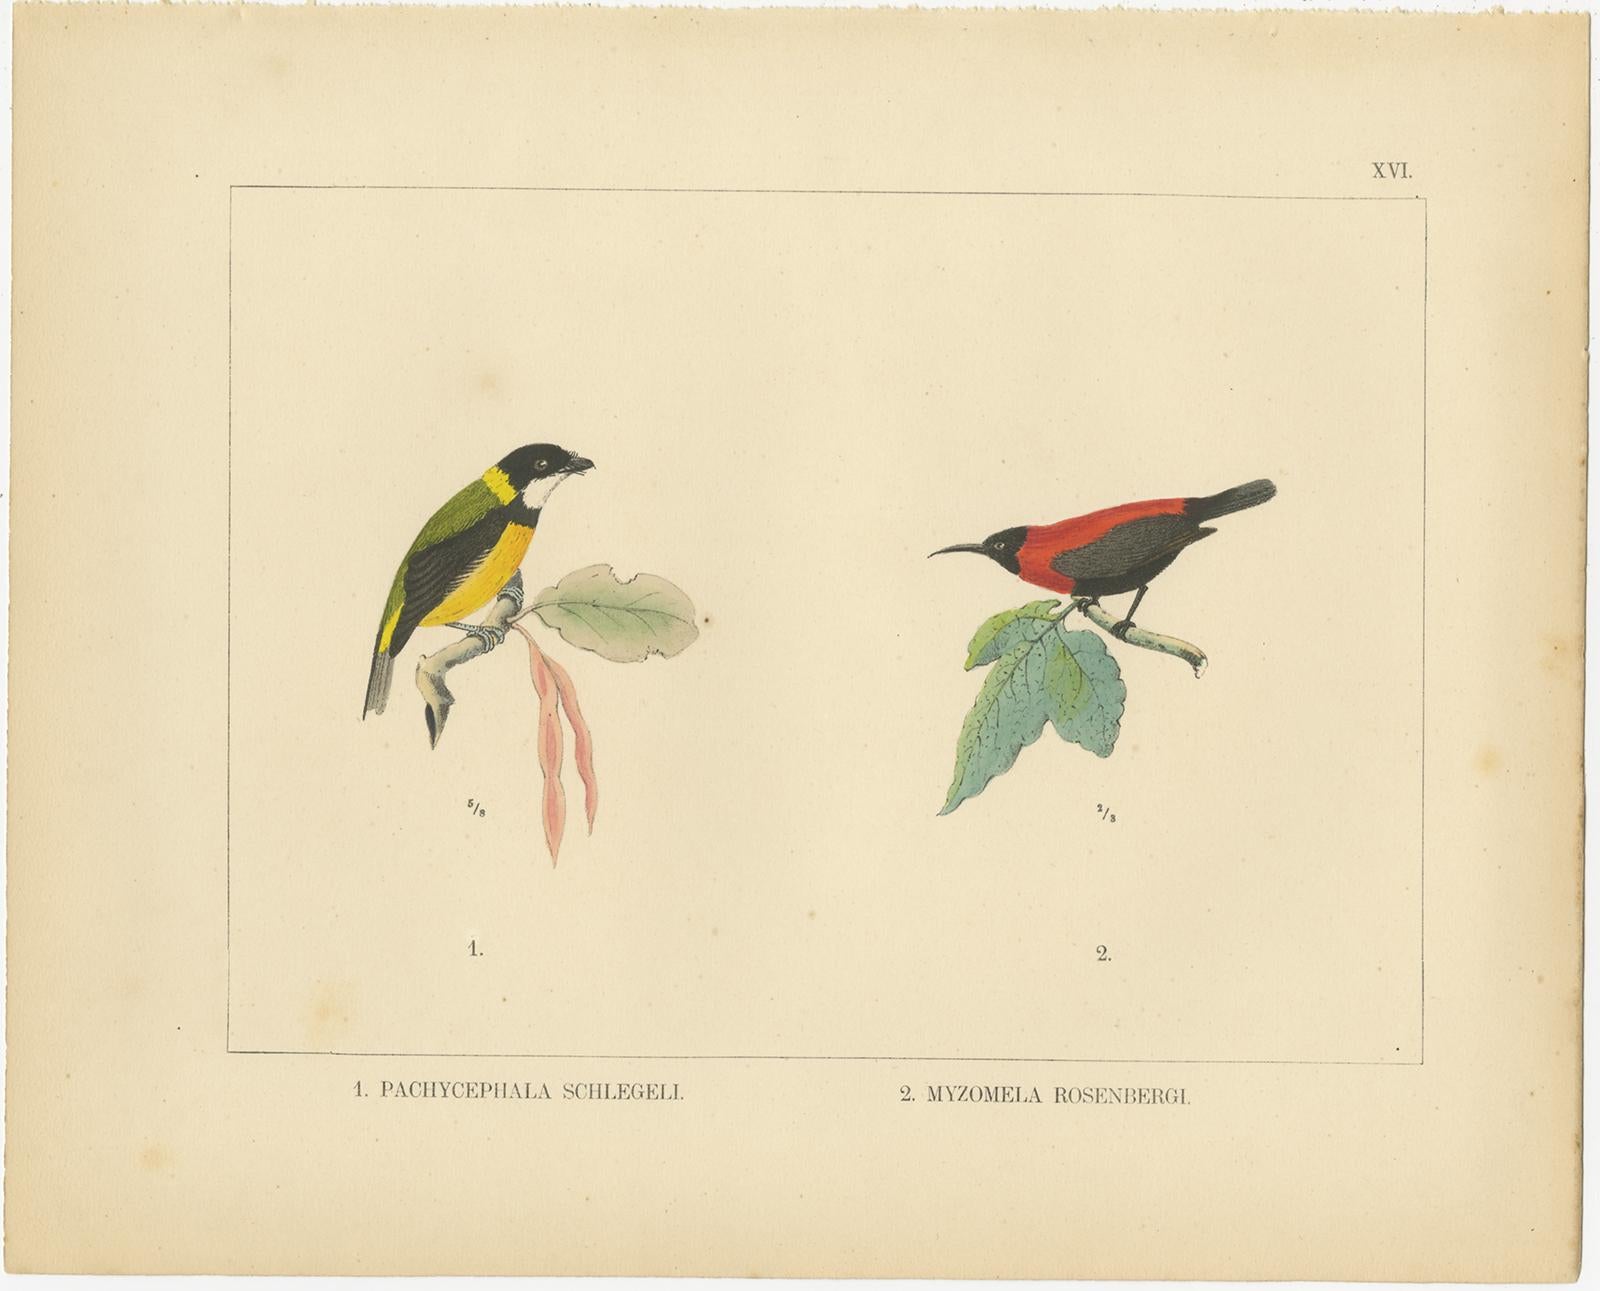 Set of 21 Antique Prints Illustrating the Travels to Cenderawasih Bay, 1875 For Sale 11